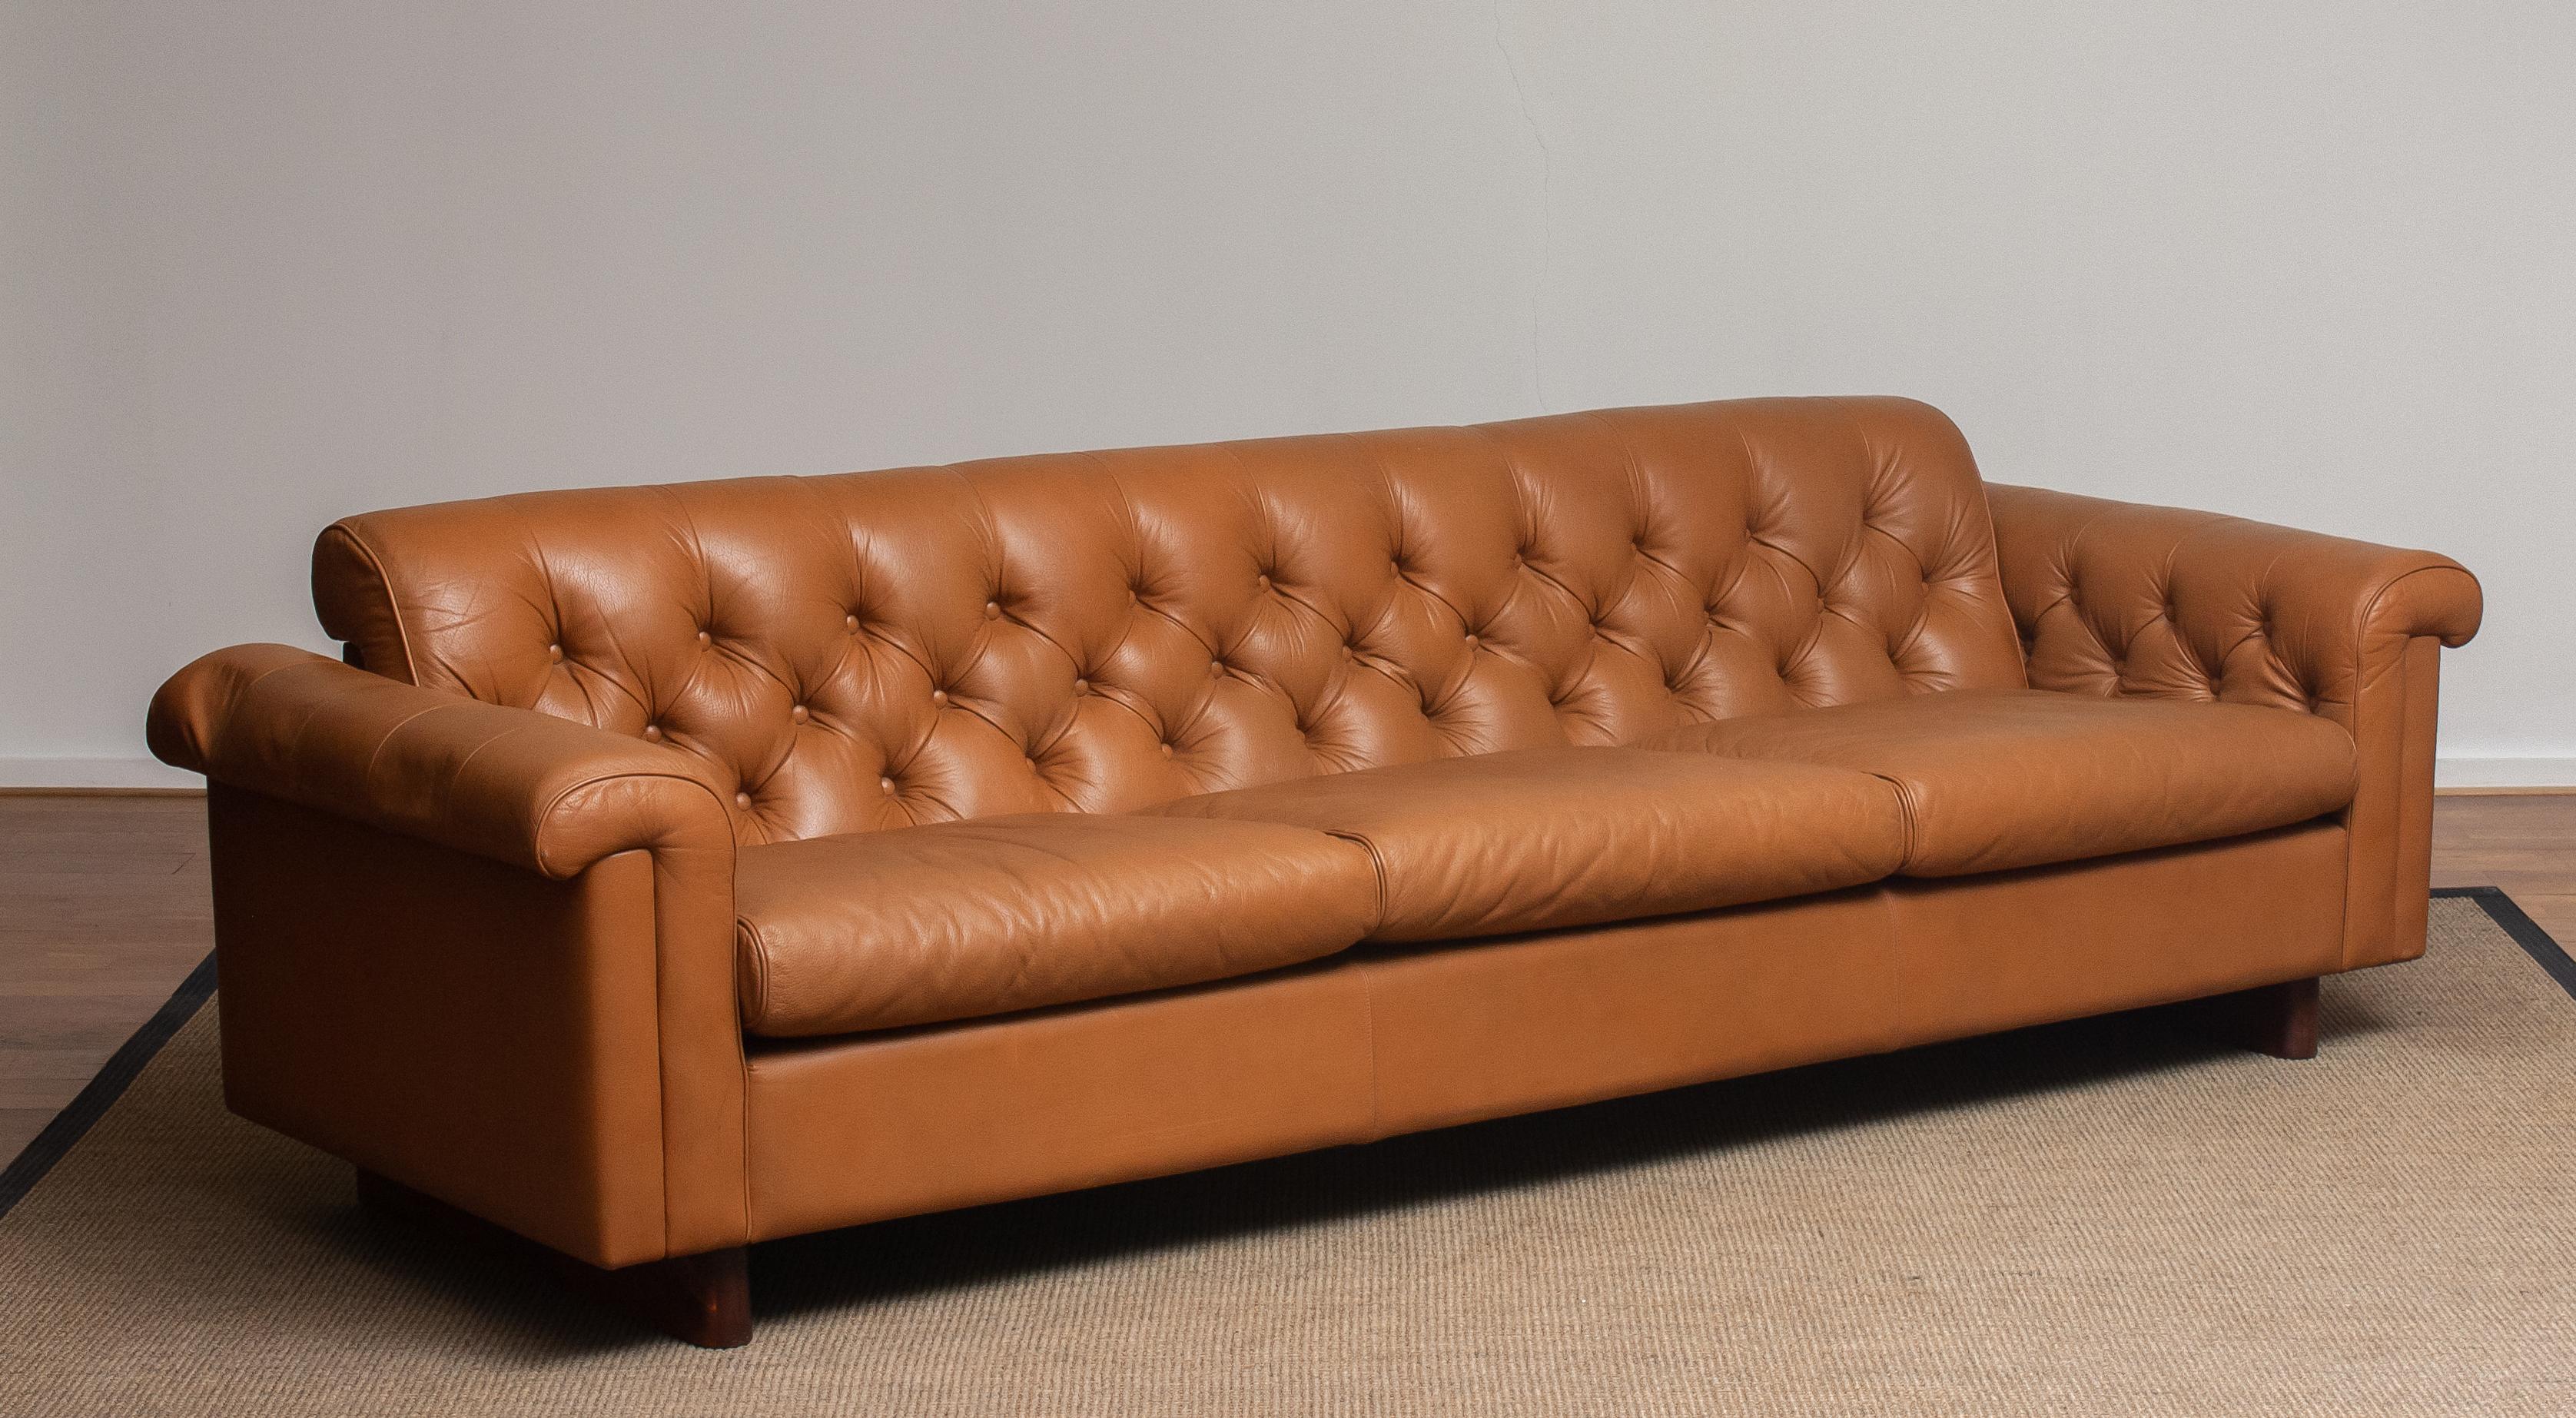 Absolutely rare and beautiful (Chesterfield model) sofa in camel color tufted leather from the second half of the 70's designed by Karl Erik Ekselius for JOC Design Vetlanda in Sweden. (Labeled)
This sofa feels soft and sits extremely comfortable.